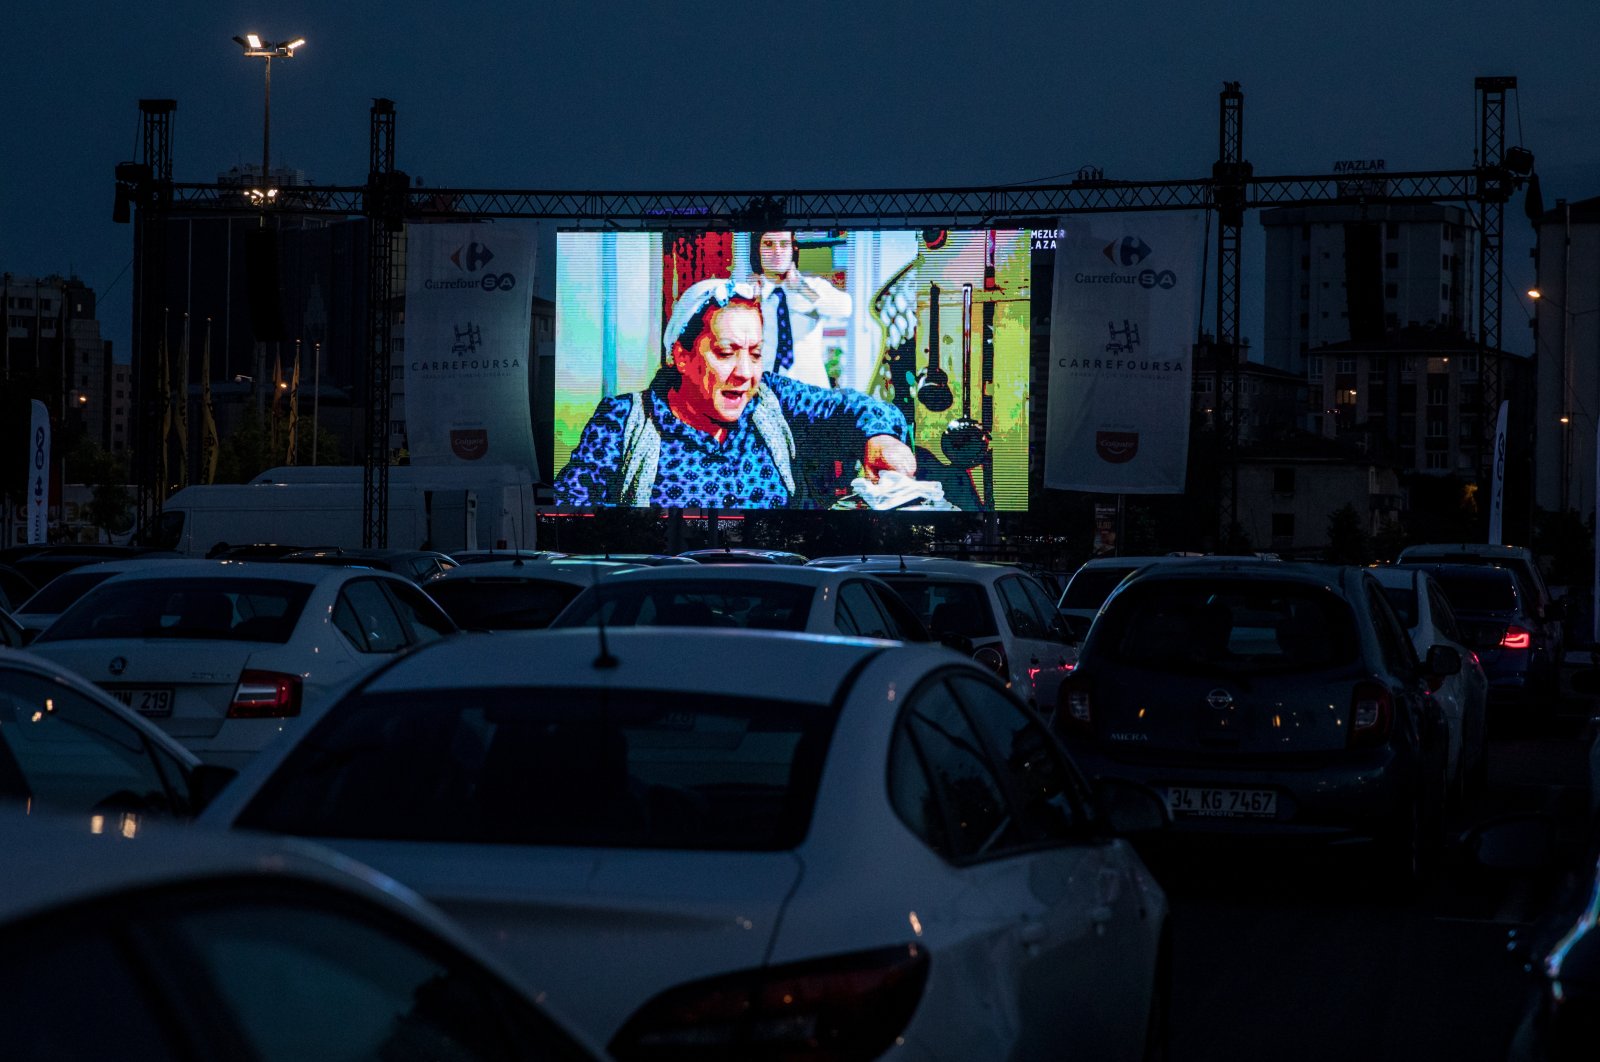 People watch a classic Turkish movie from their cars at a temporary drive-in theatre held in a shopping mall car park amid the ongoing COVID-19 pandemic, Istanbul, Türkiye, May 28, 2020. (Getty Images Photo)